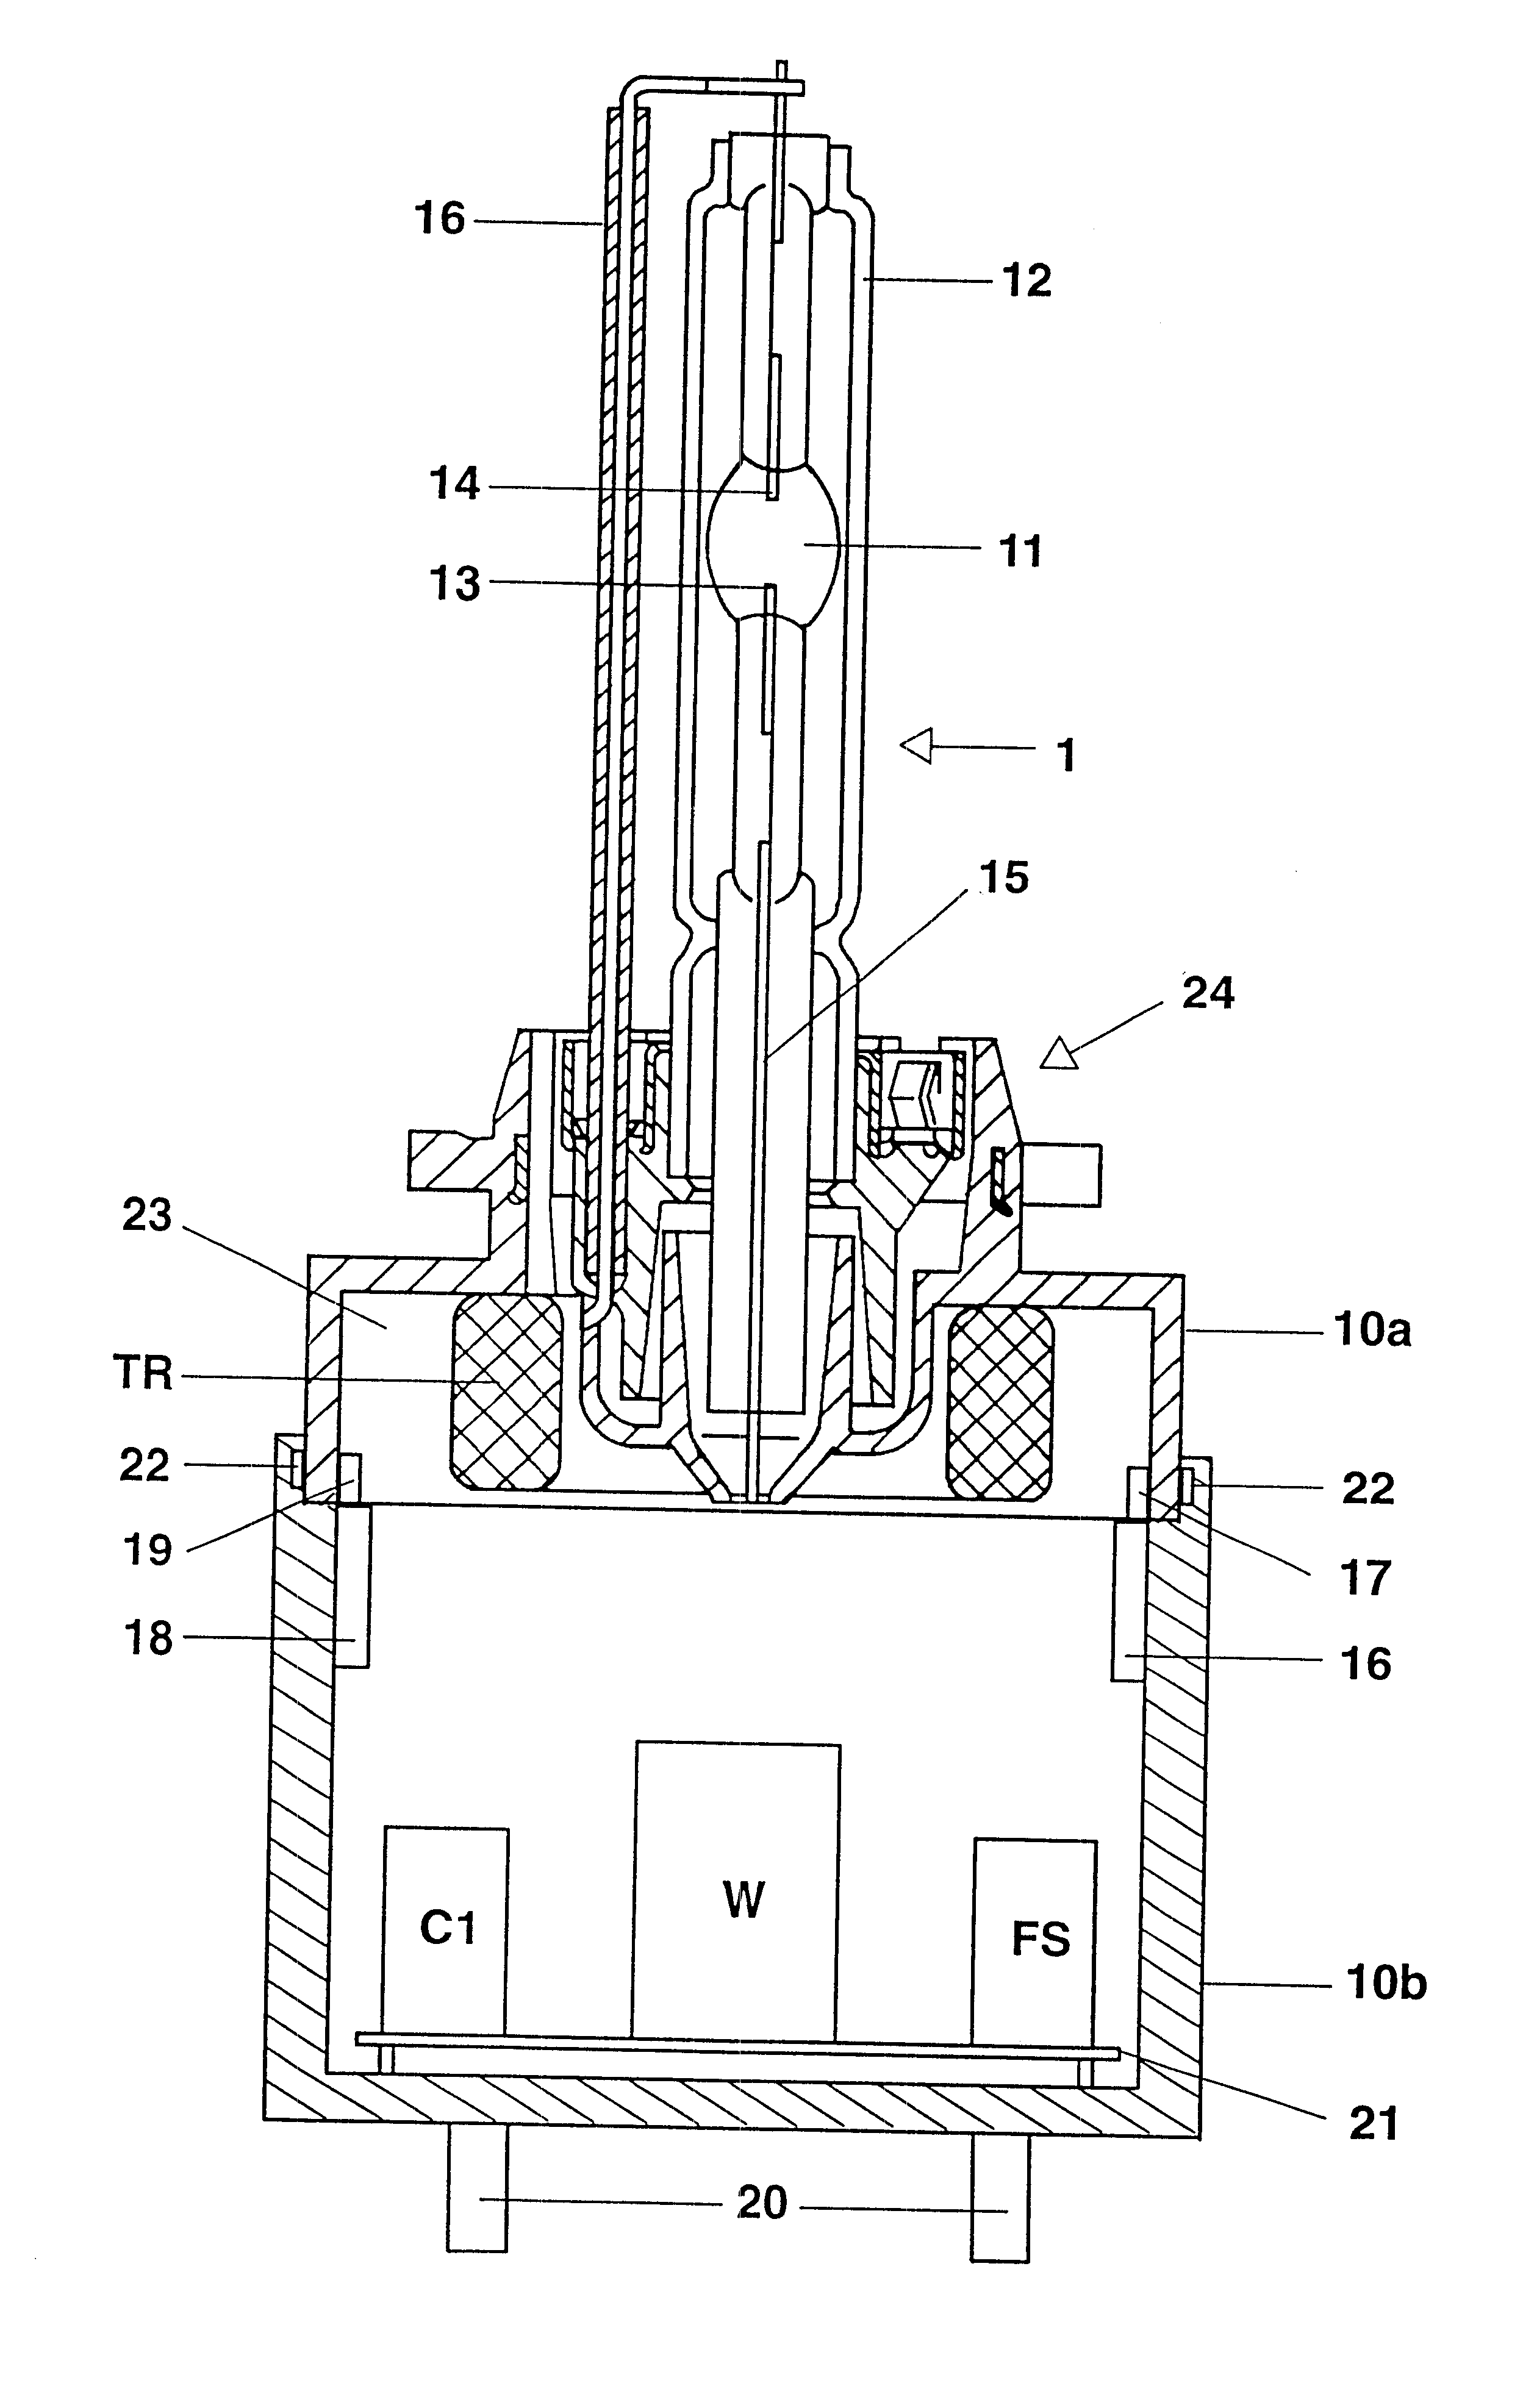 Lighting system with a high-pressure discharge lamp